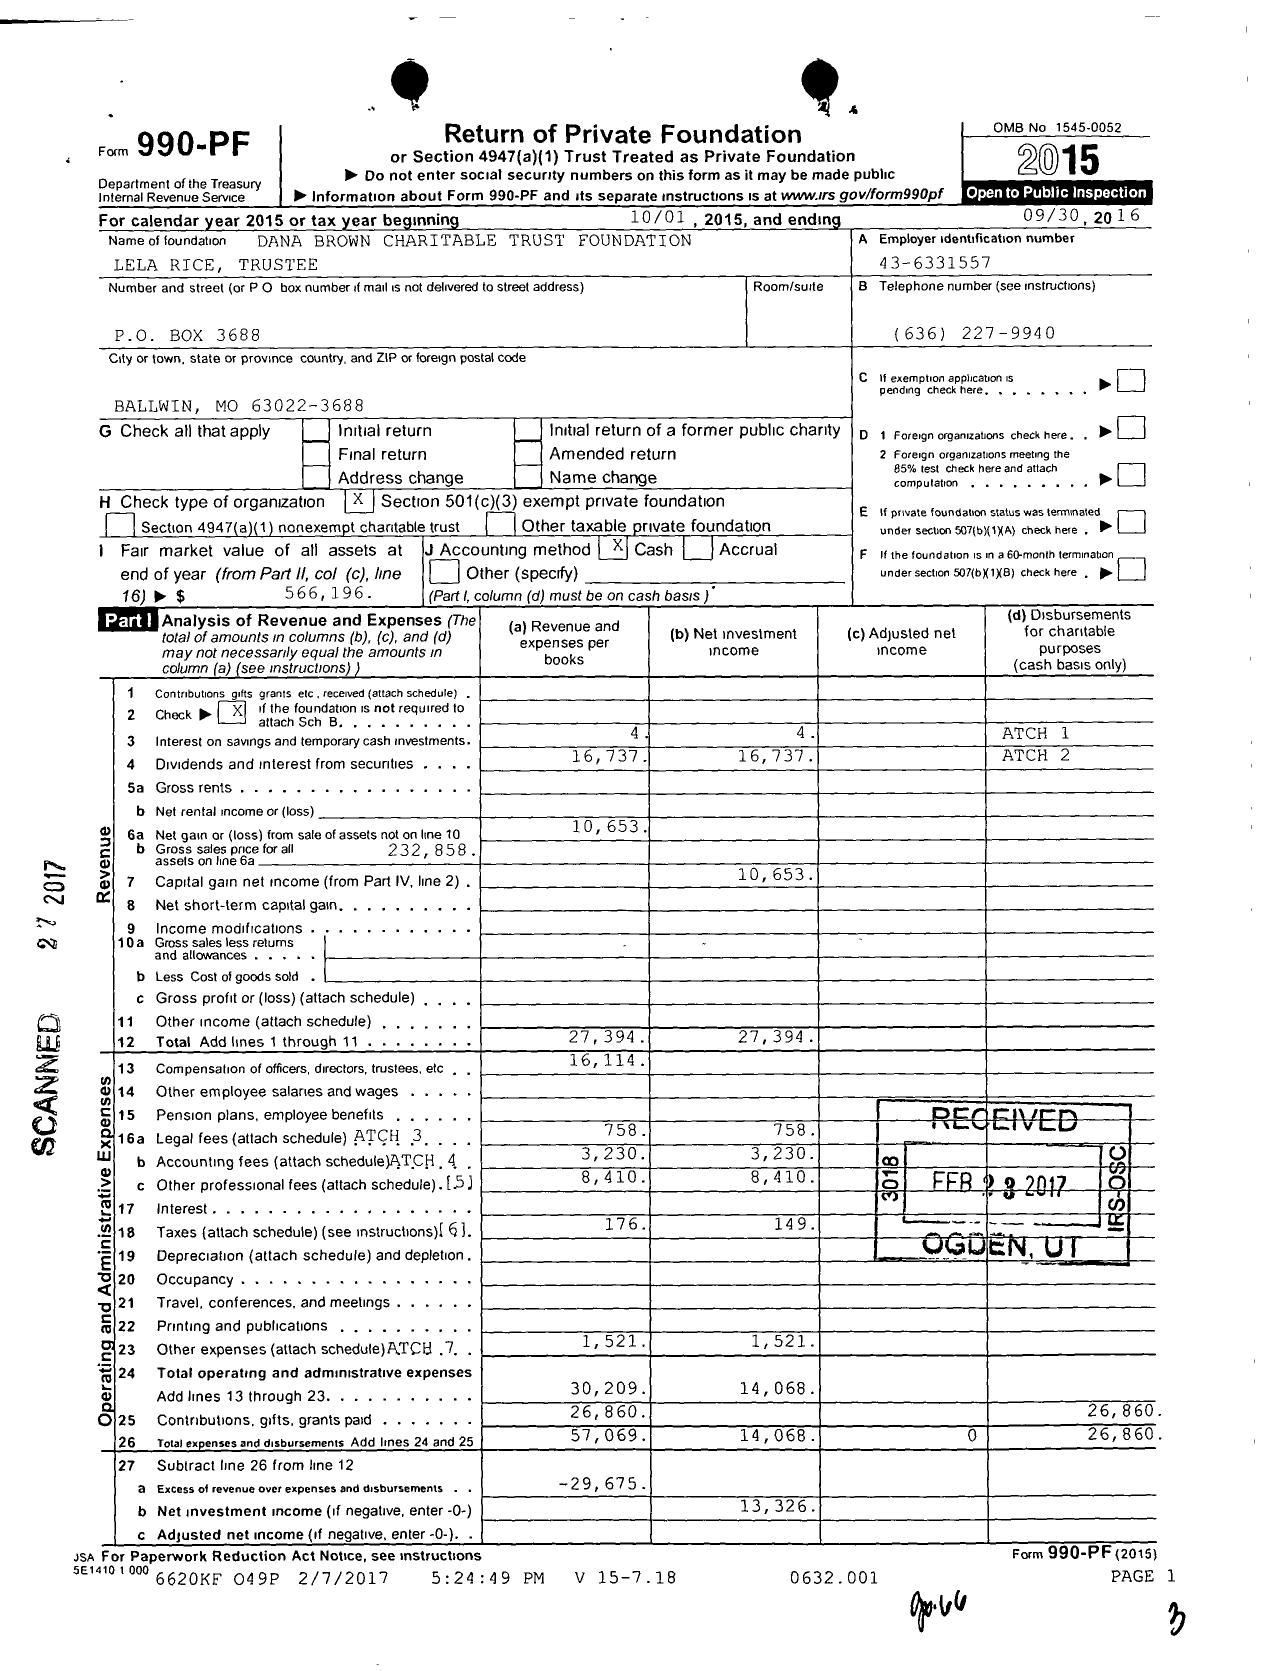 Image of first page of 2015 Form 990PF for Dana Brown Charitable Trust Foundation